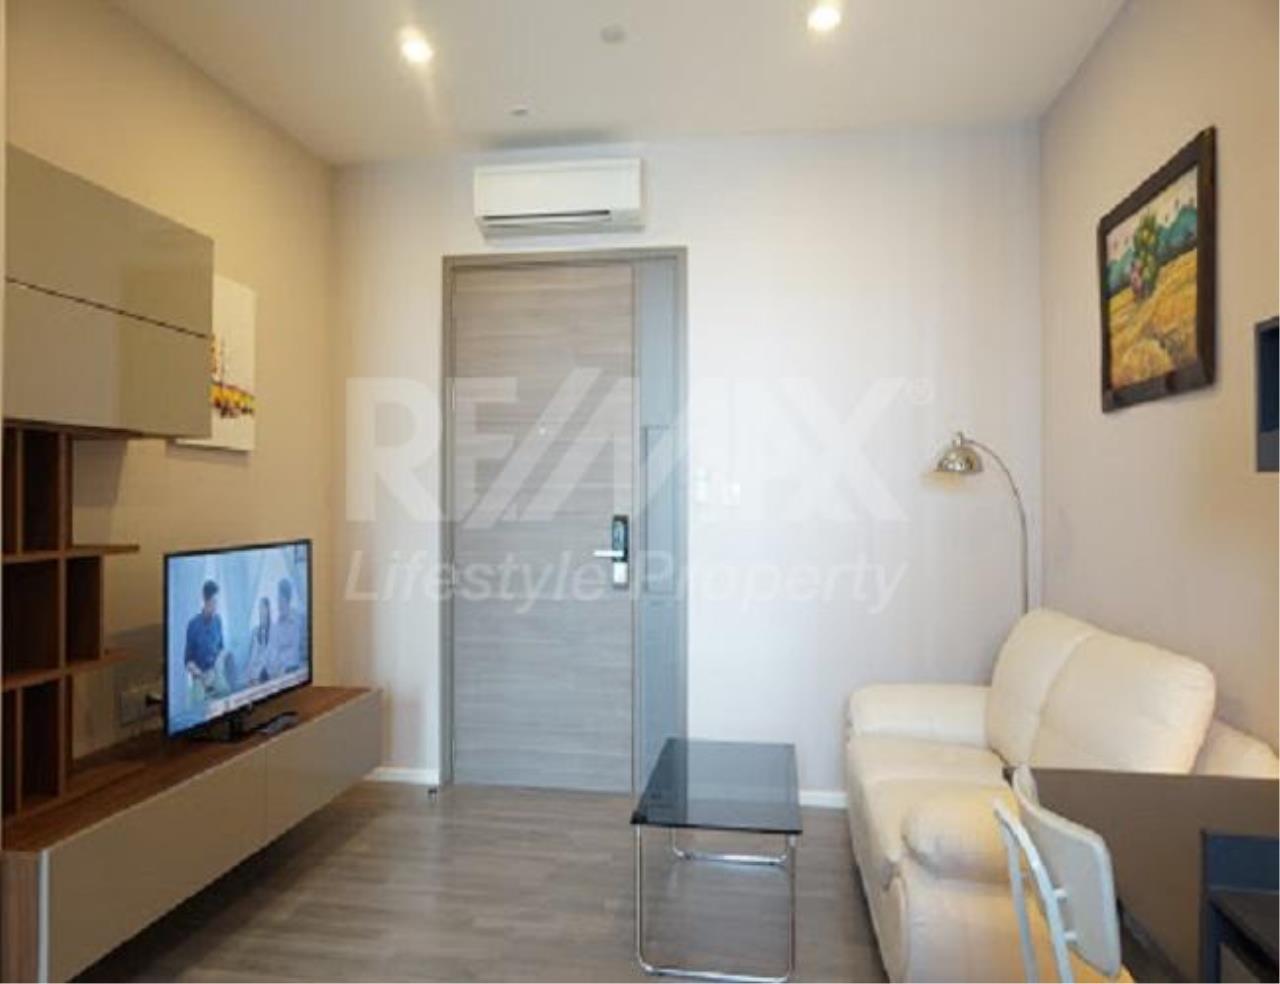 RE/MAX LifeStyle Property Agency's The Room Sukhumvit 69 13